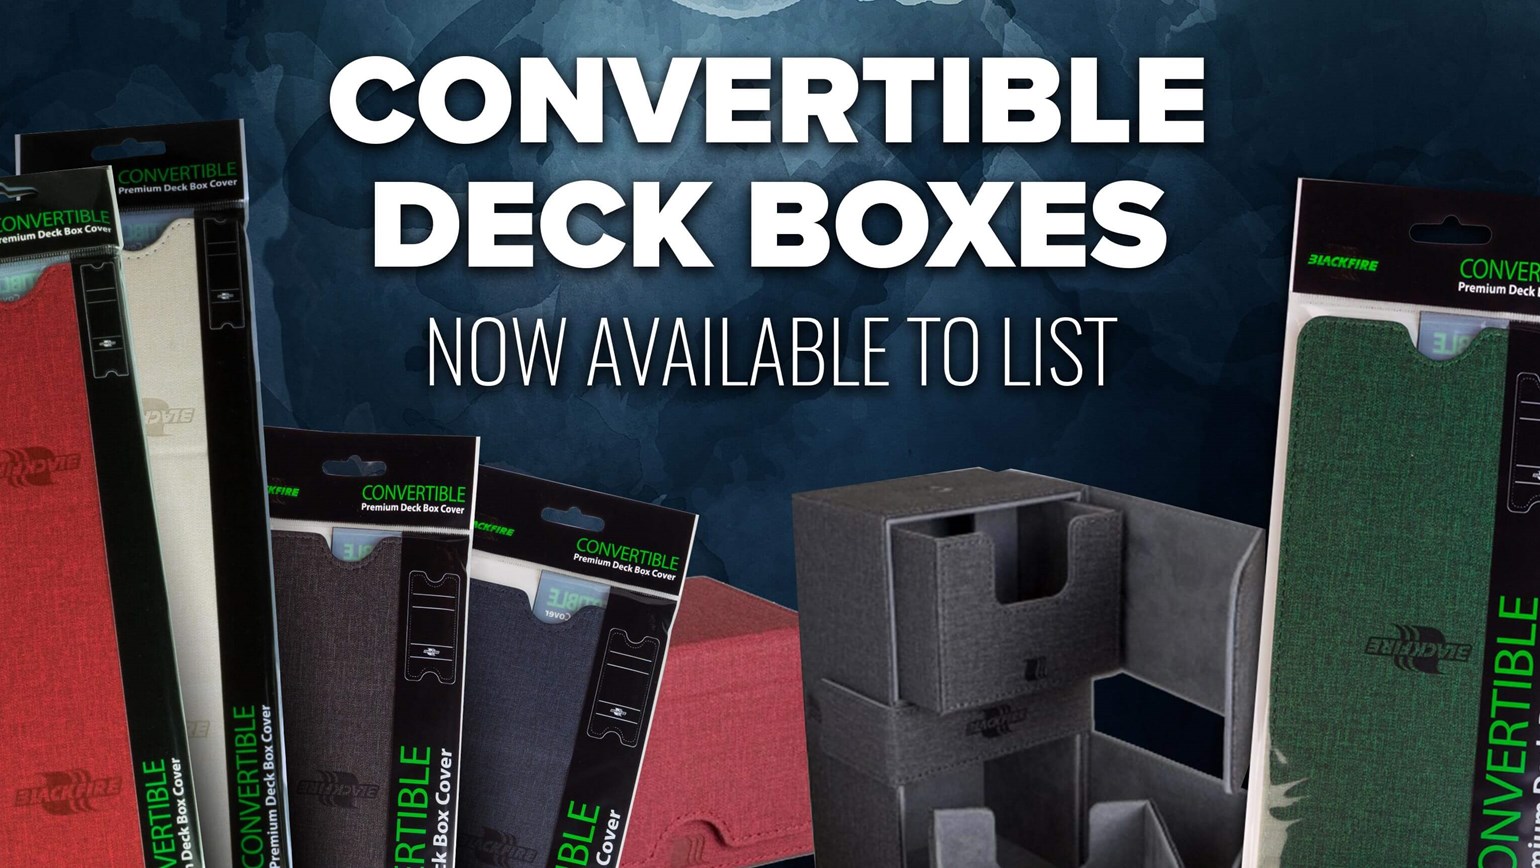 Convertible Deck Boxes from Legion Premium Supplies Added to TCGplayer Catalog